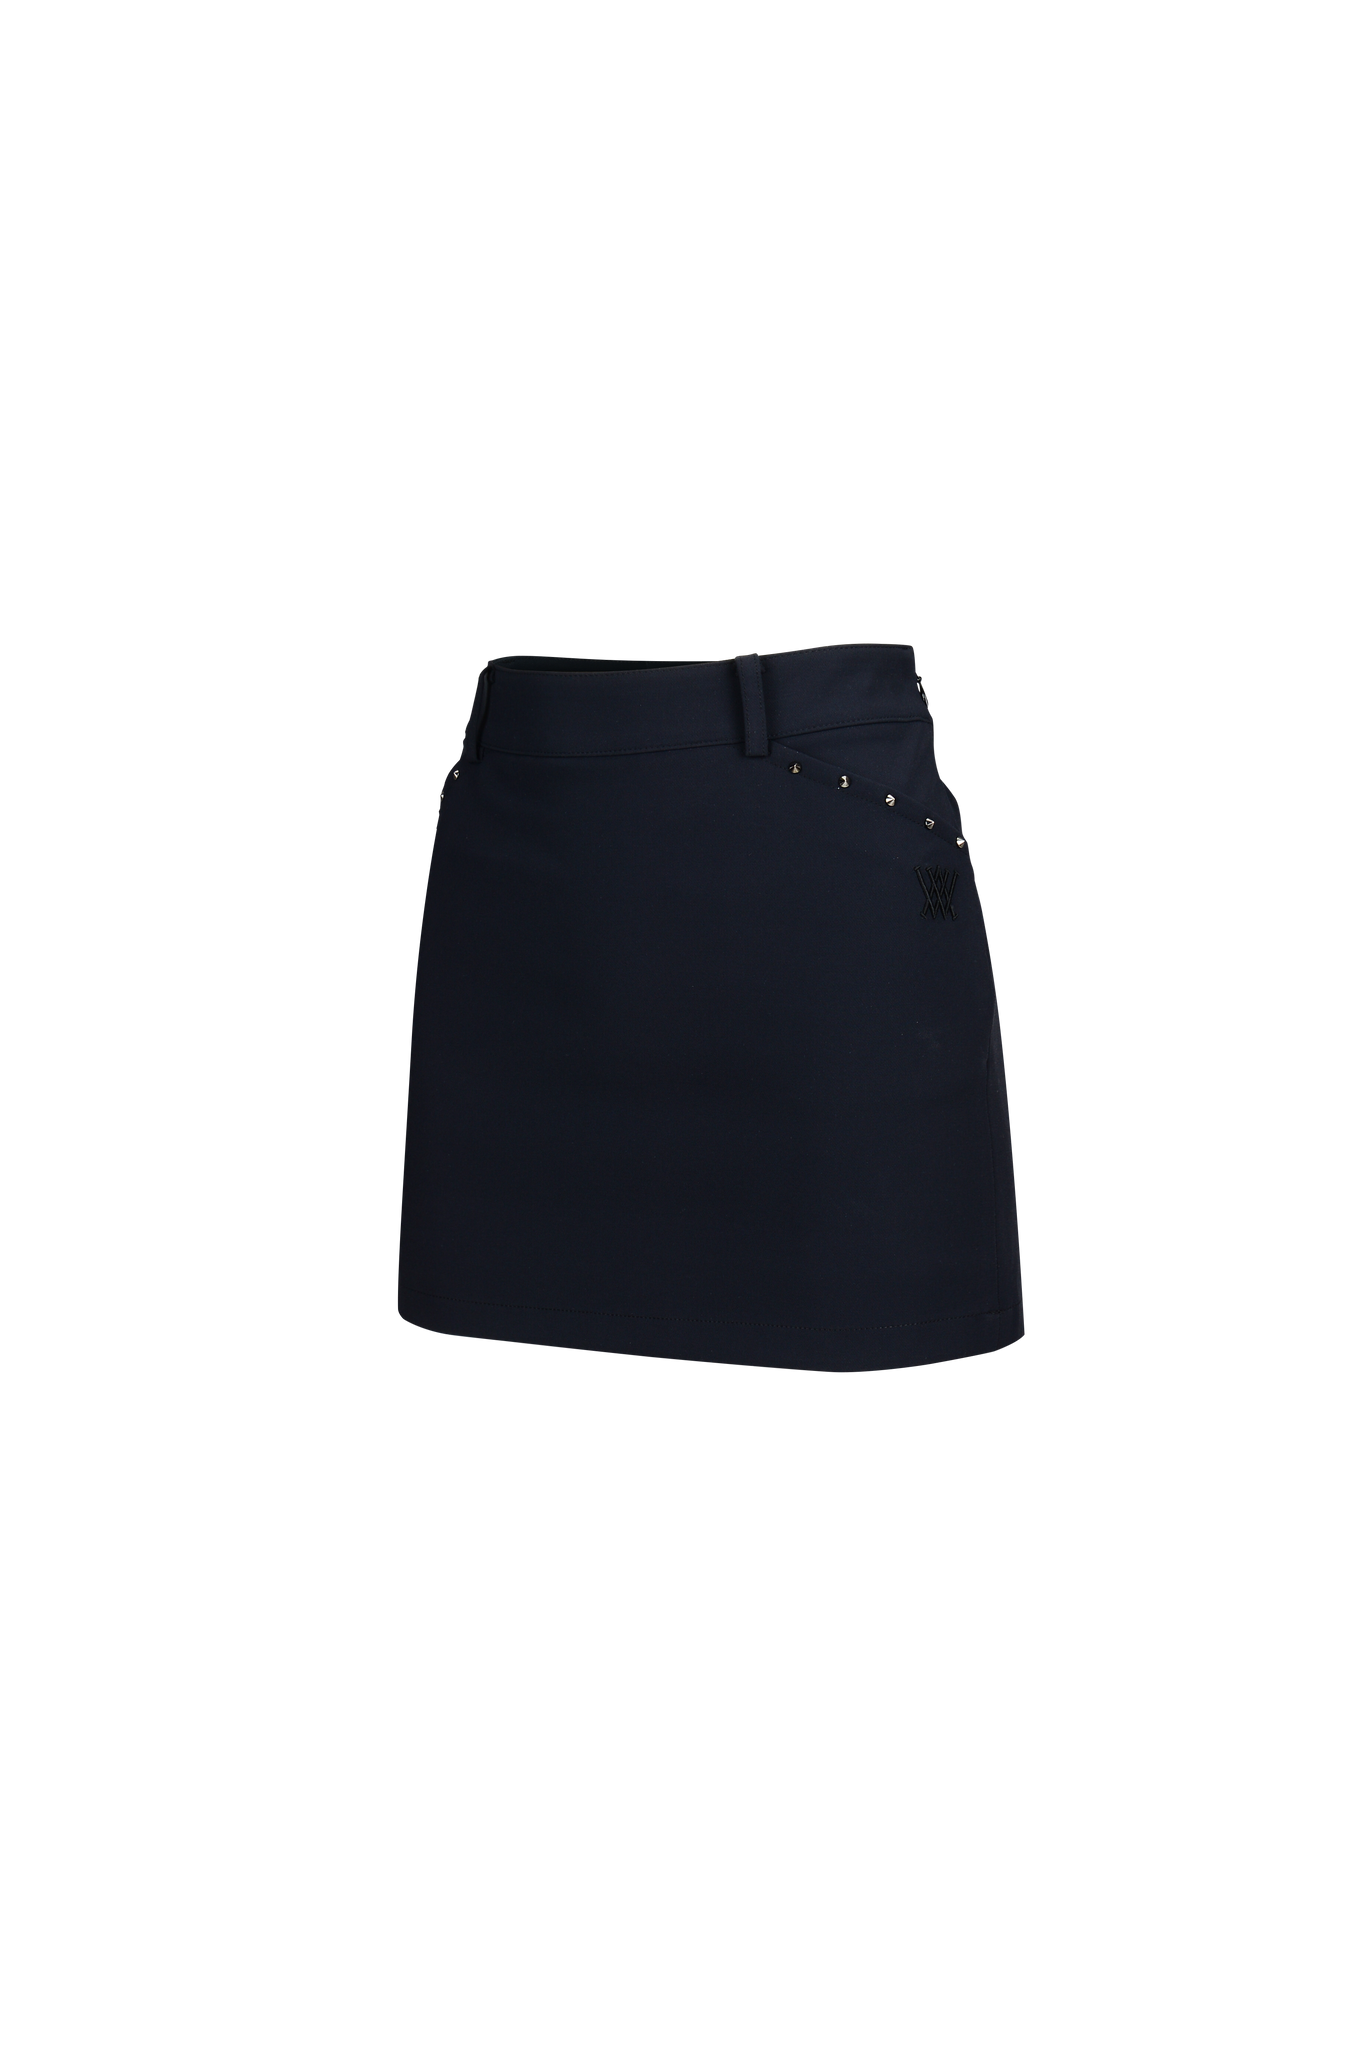 [Special Deal] Women's Stud Point SQ 2 - Black